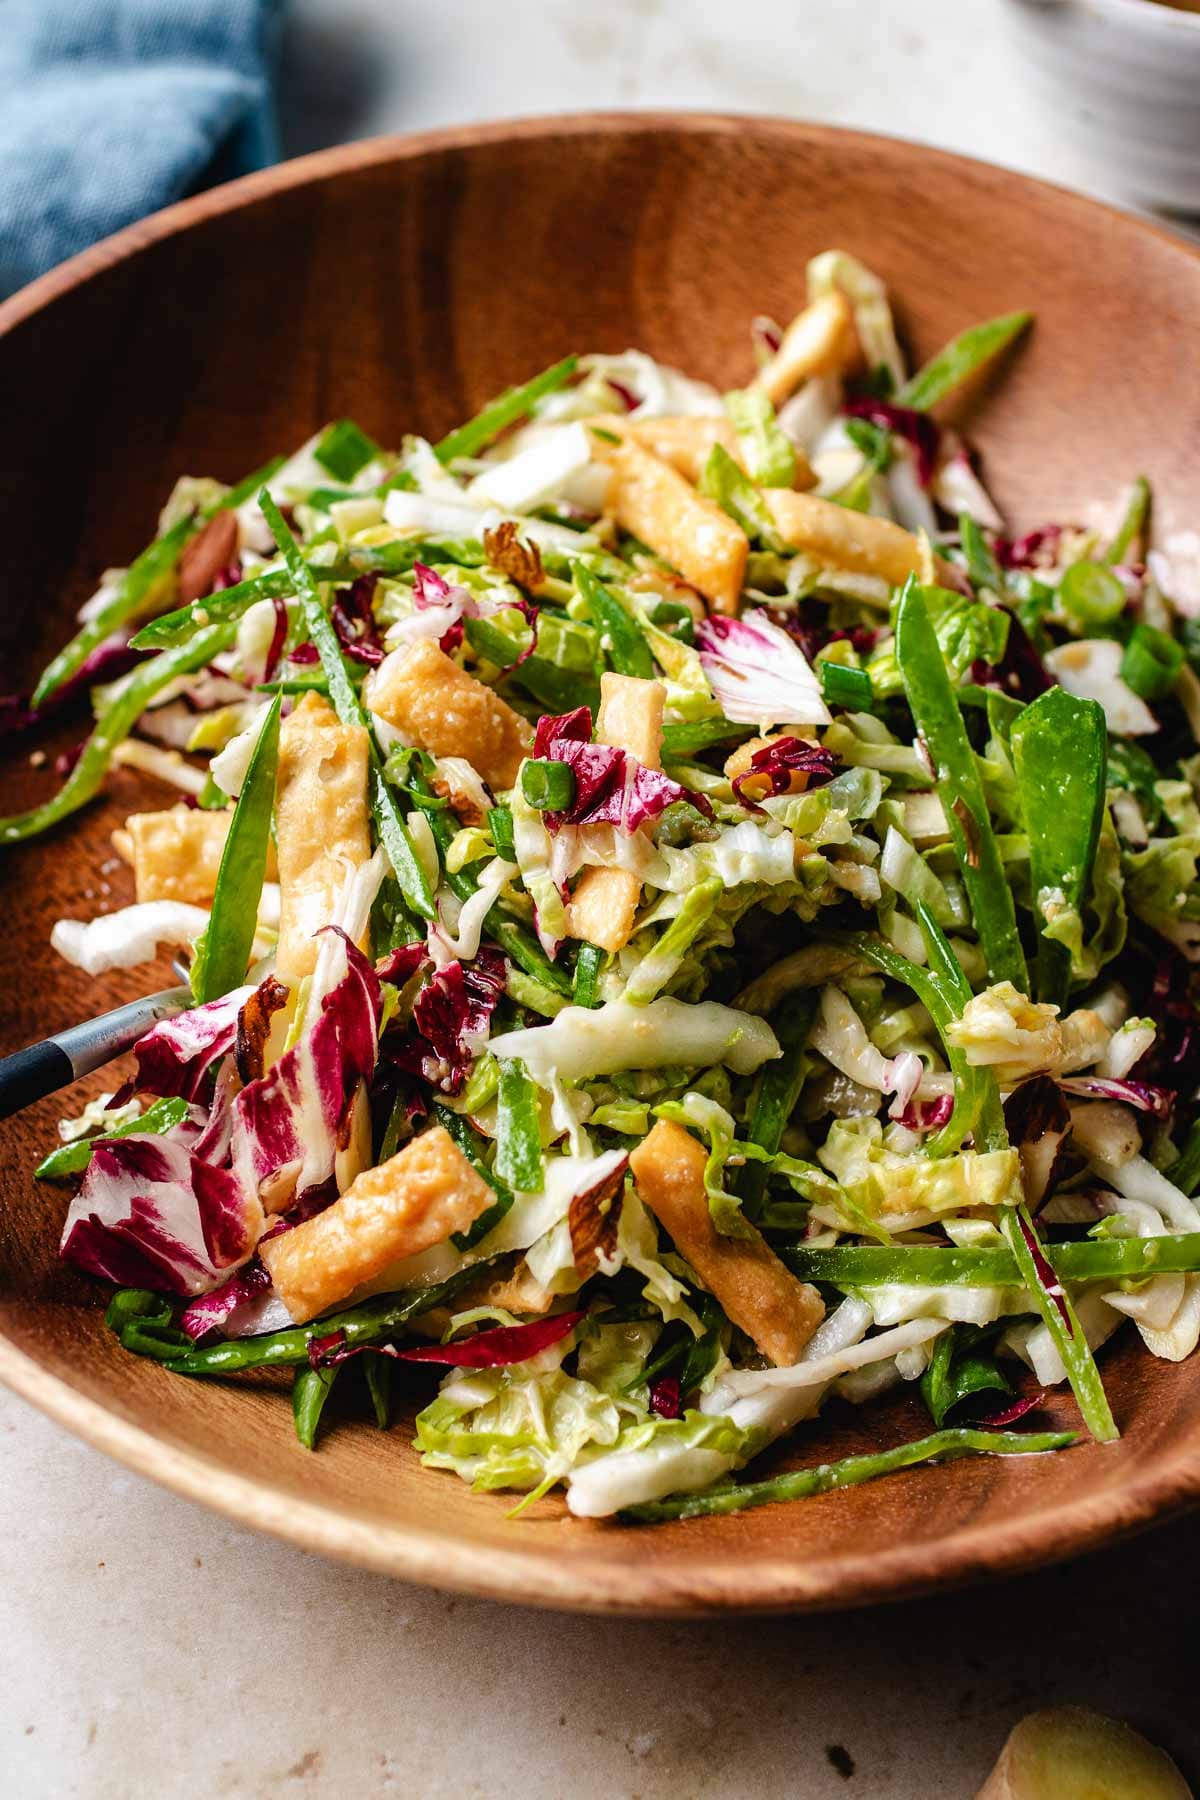 A side close shot image shows napa slaw served in a wood plate and tossed with dressing.